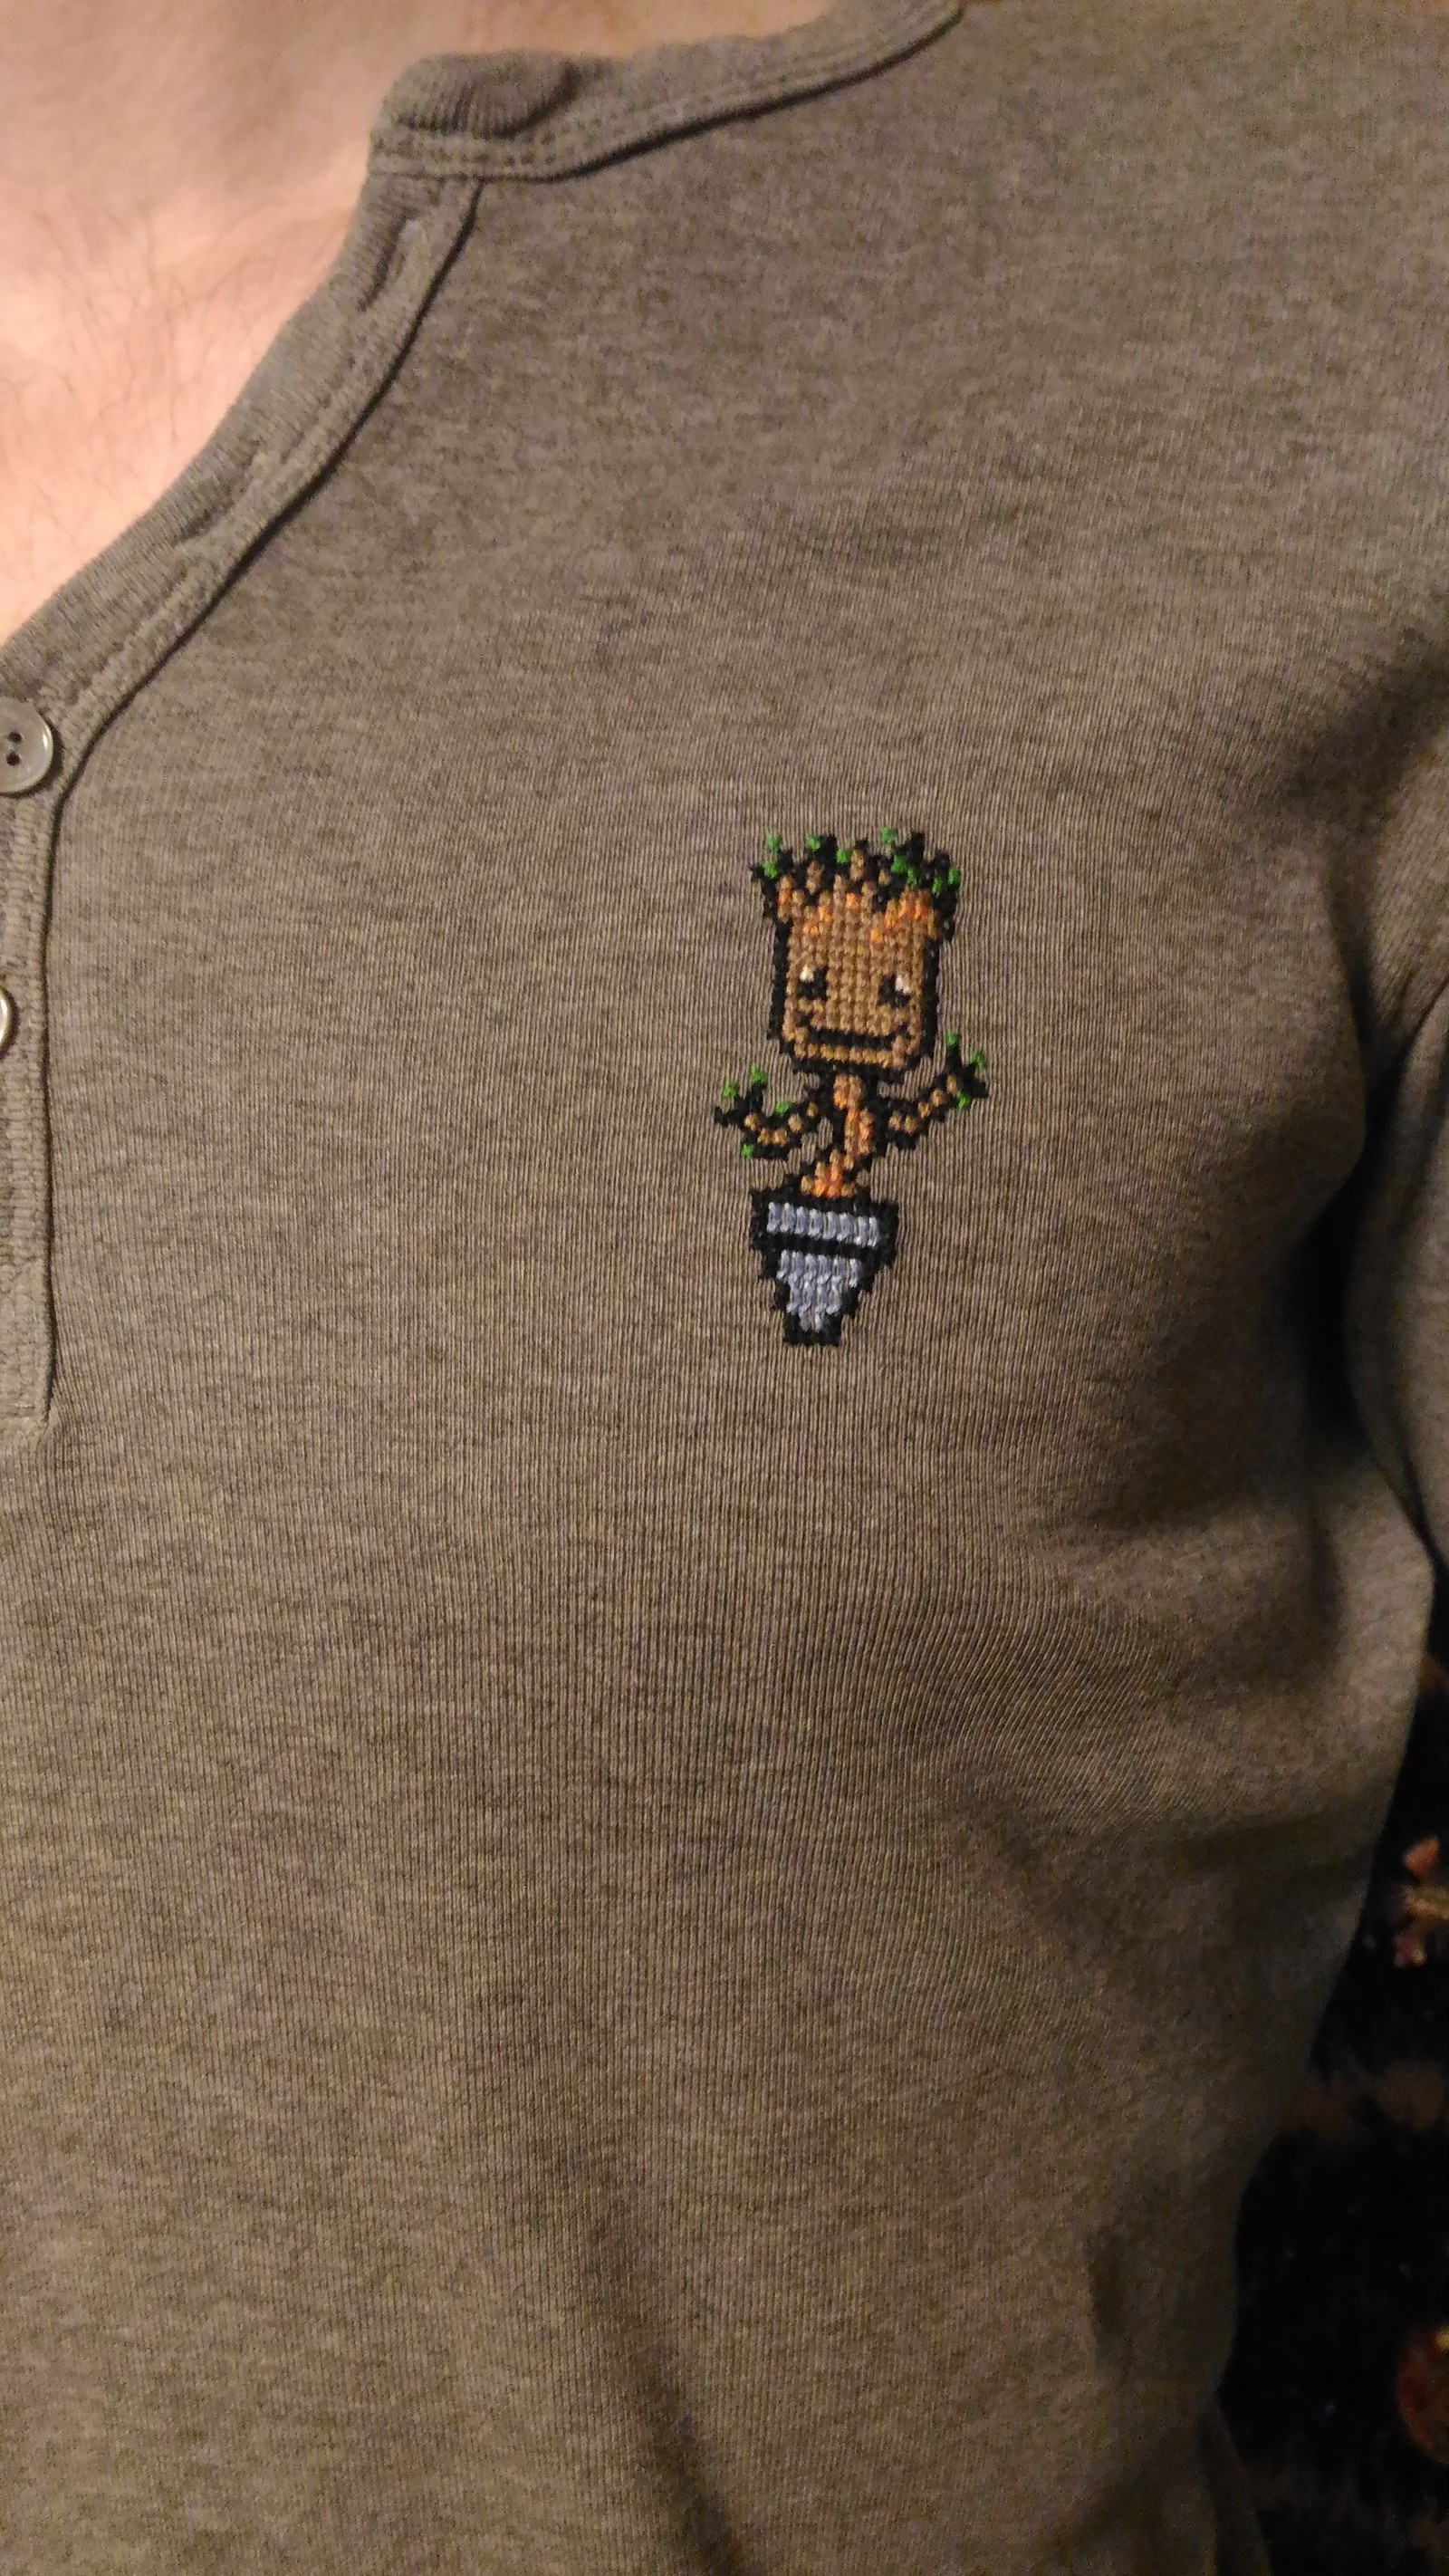 A little about baby Groot - Longpost, Handmade, Cross-stitch, Hobby, Friday tag is mine, Groot, Guardians of the Galaxy Vol. 2, Guardians of the Galaxy, My